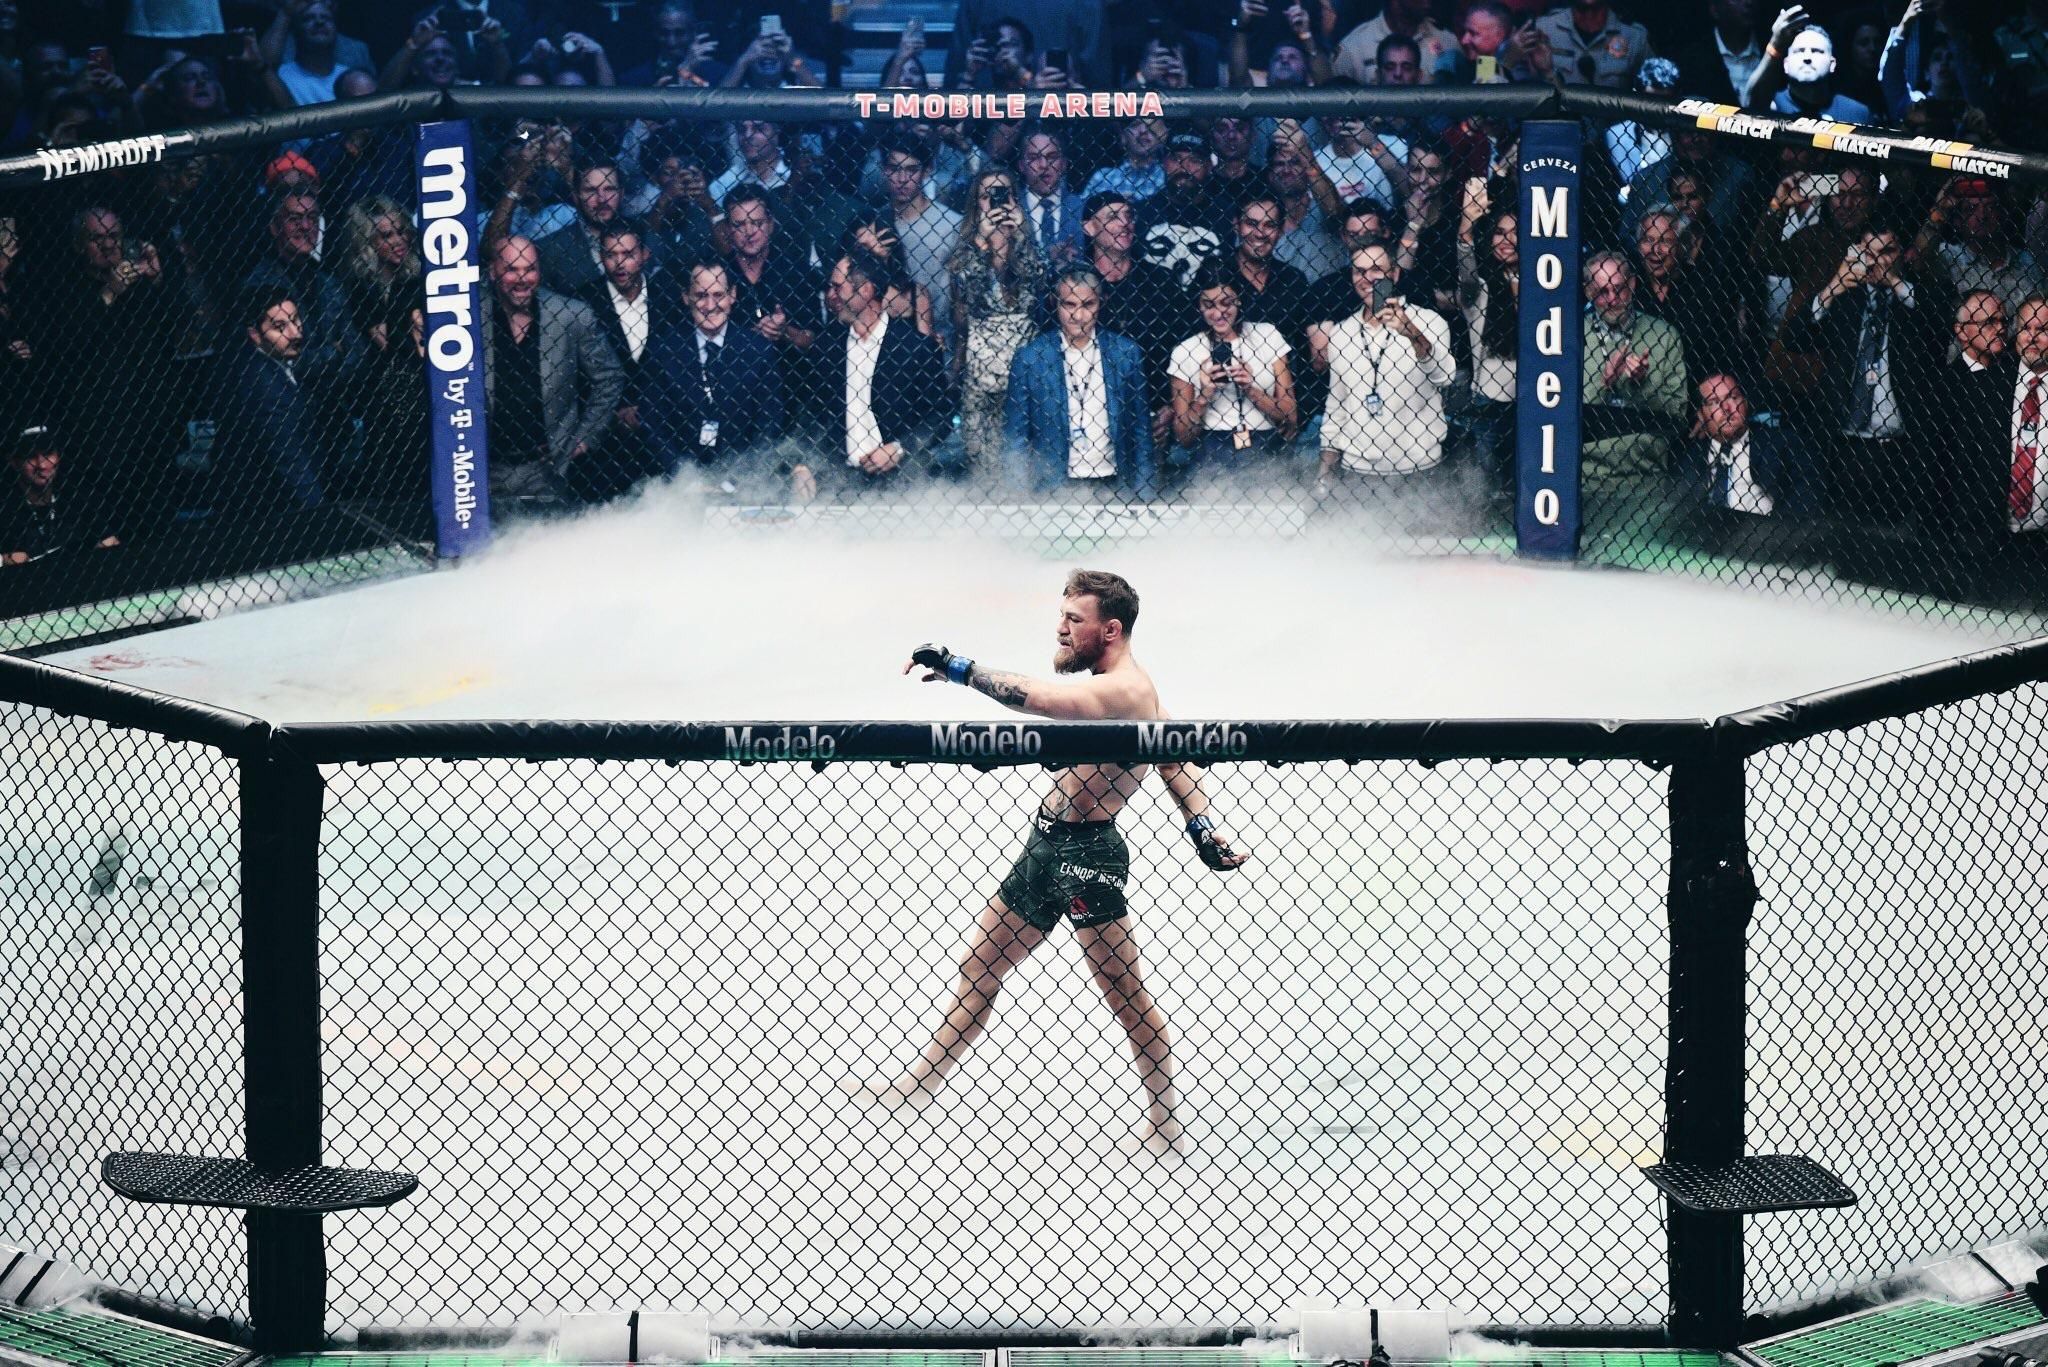 Photo of Conor McGregors UFC 229 walkout from Al Powers. Conor mcgregor, Ufc conor mcgregor, Notorious conor mcgregor